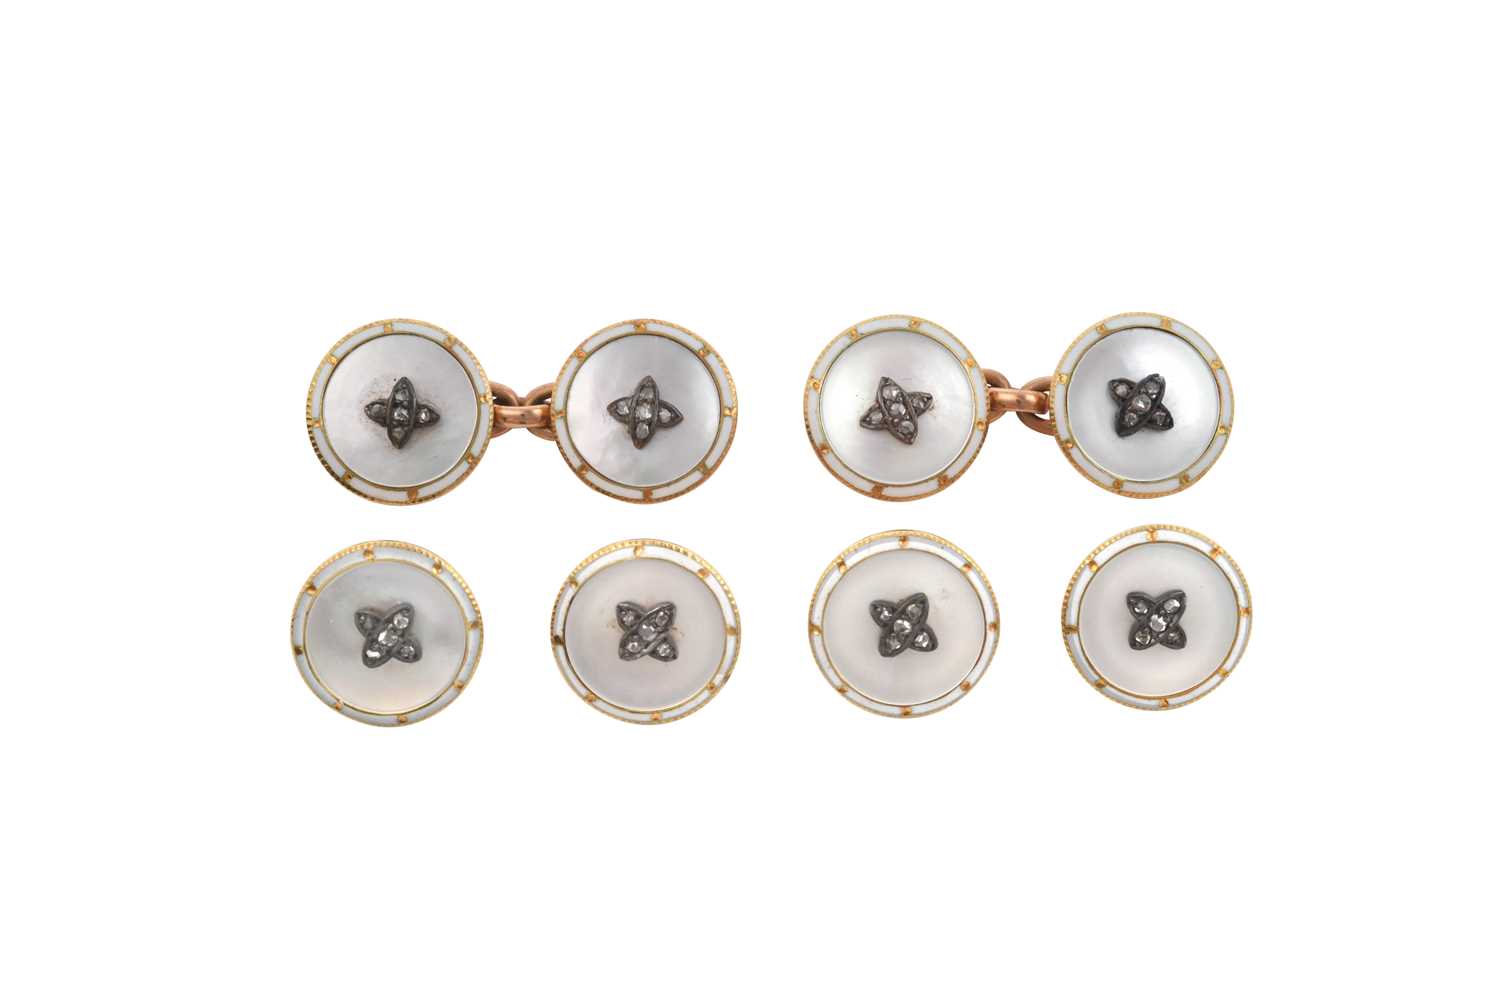 An Early 20th Century Mother-of-Pearl, Diamond and Enamel Button and Cufflink Suite comprising of